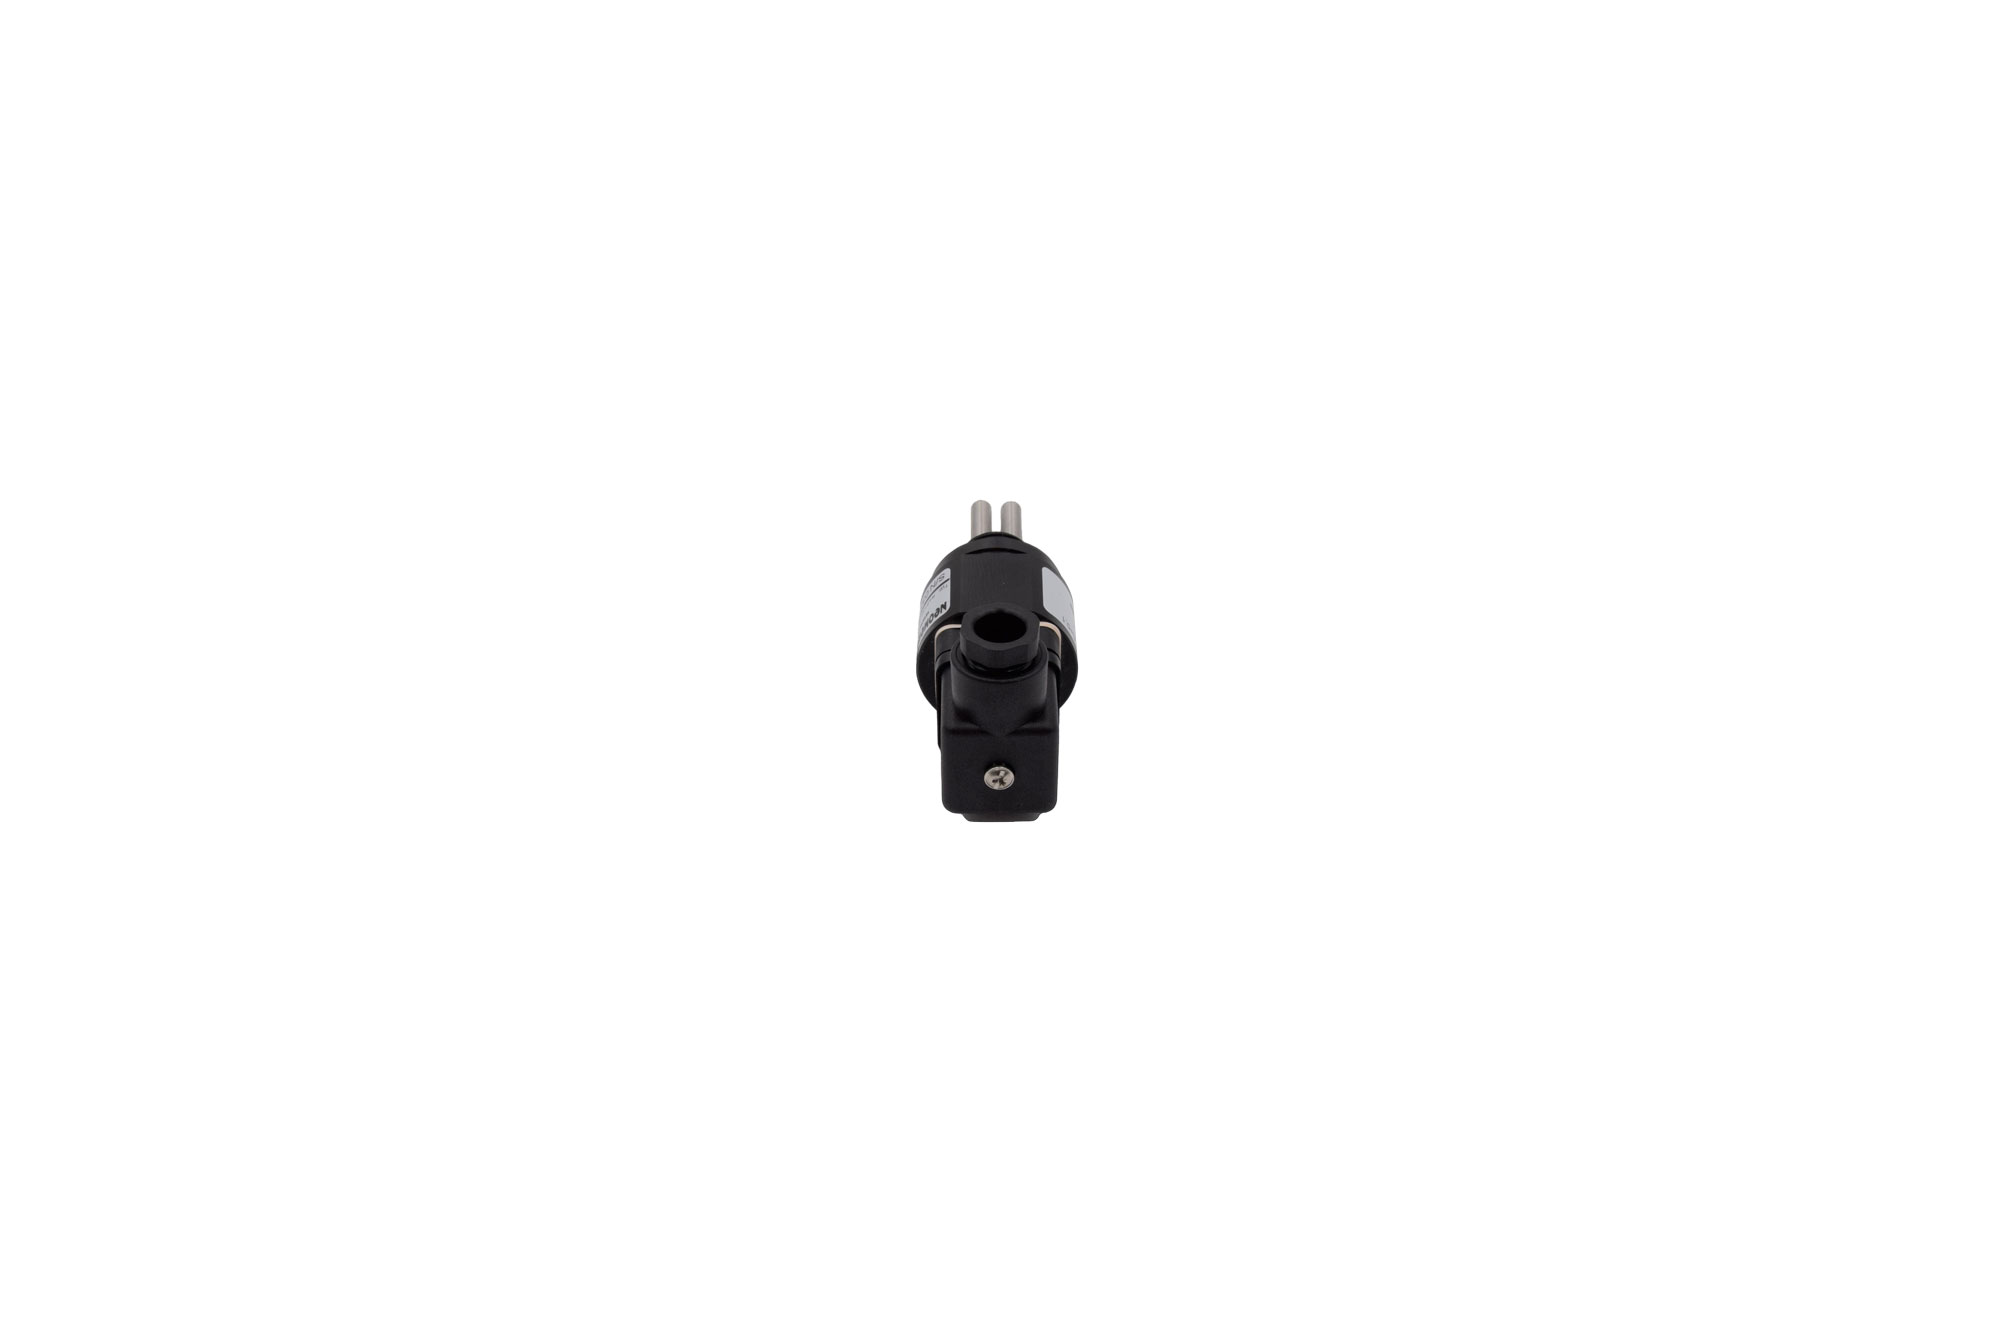 N-LF1201 conductivity measuring cell C=0.1 with PT100, 1/2 inch screw-in cell and solenoid valve connector